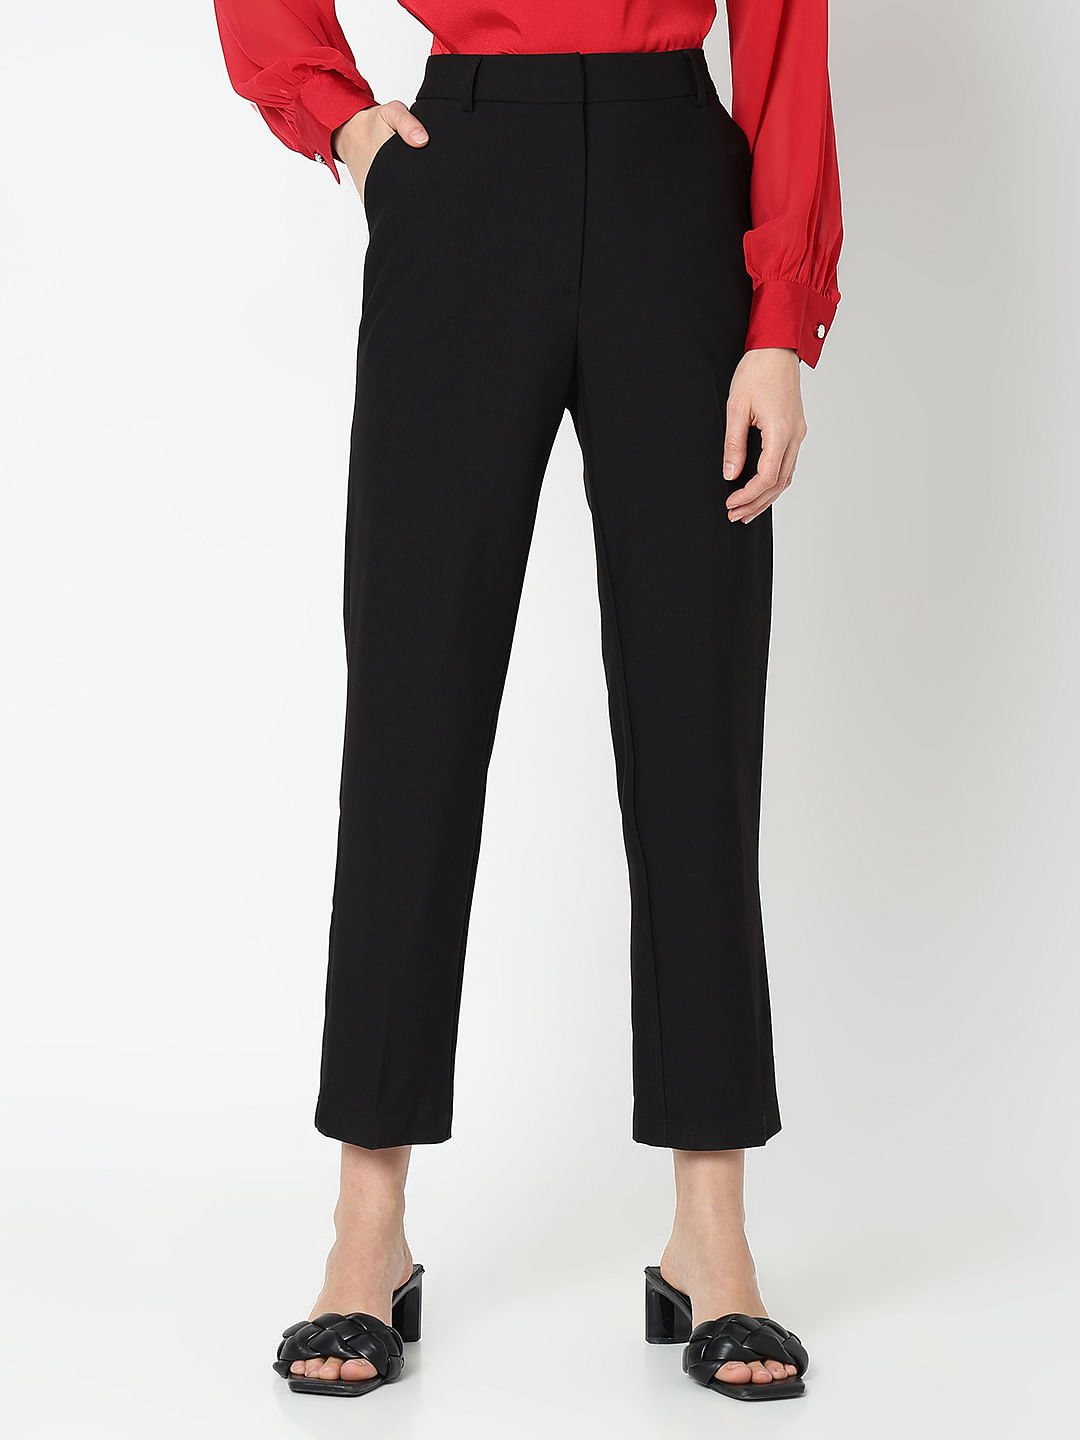 Ted Baker Ozete Ankle Grazer Trousers, Black at John Lewis & Partners